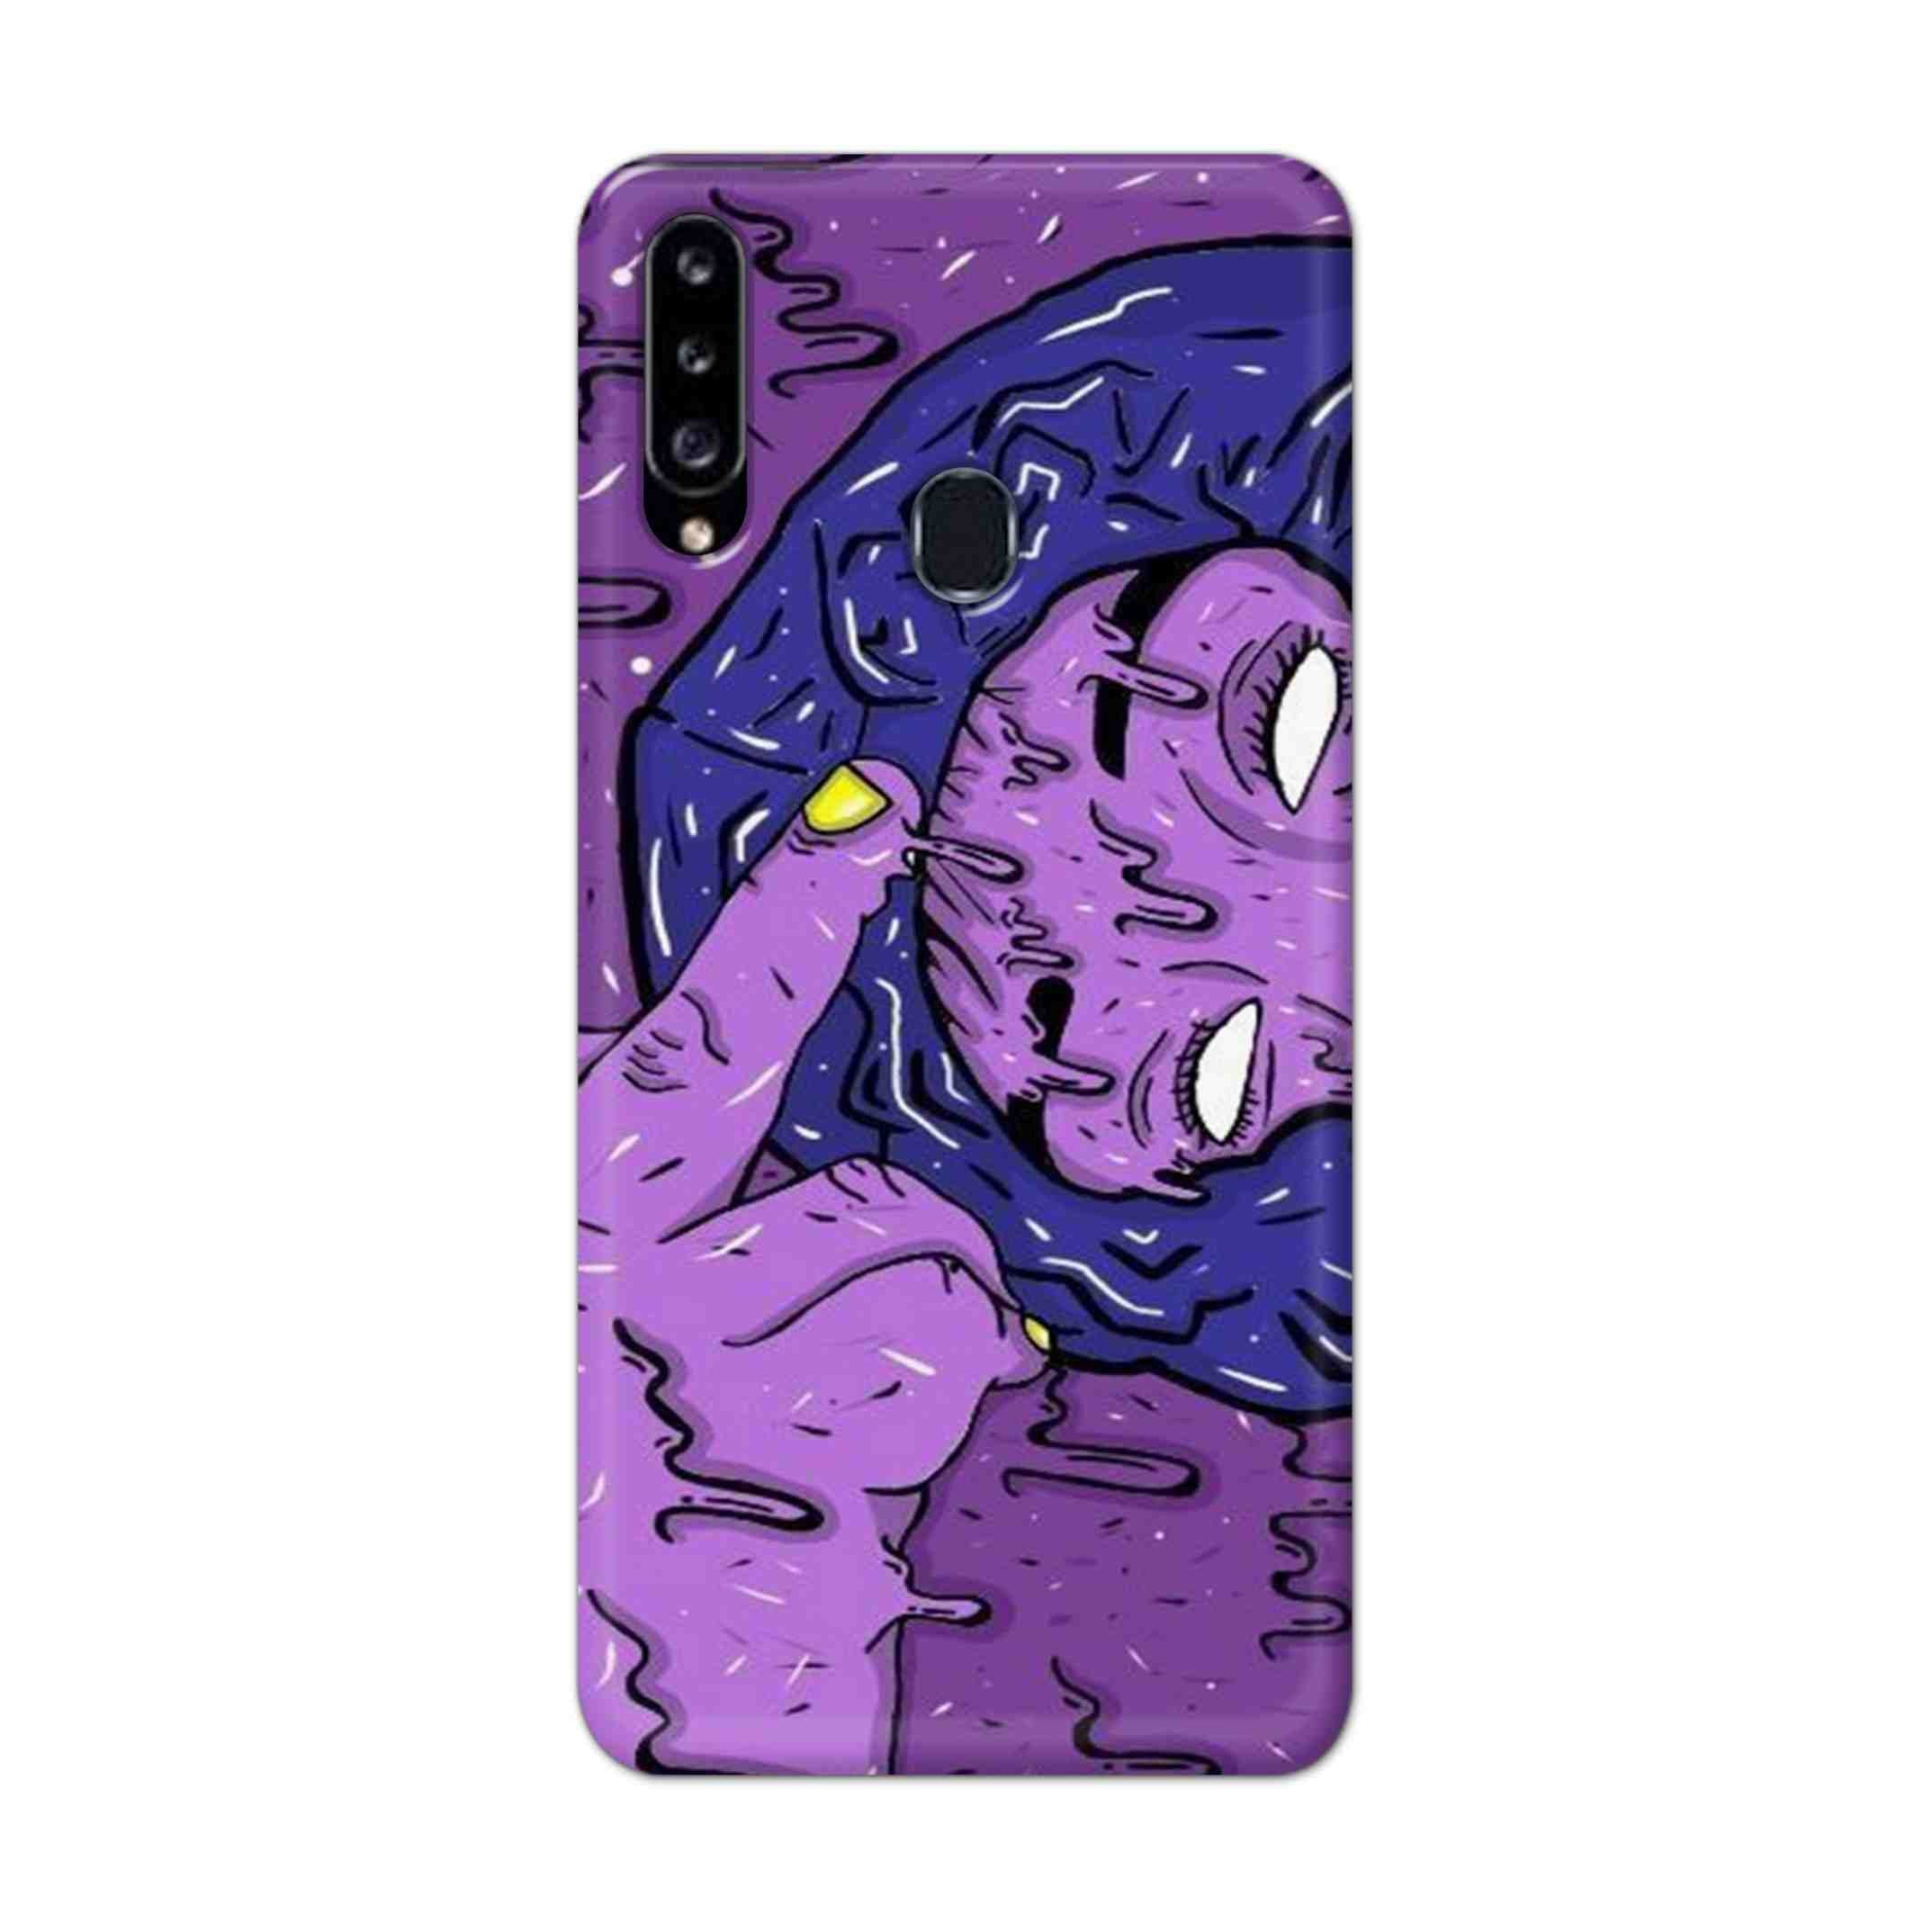 Buy Dashing Art Hard Back Mobile Phone Case Cover For Samsung Galaxy A21 Online